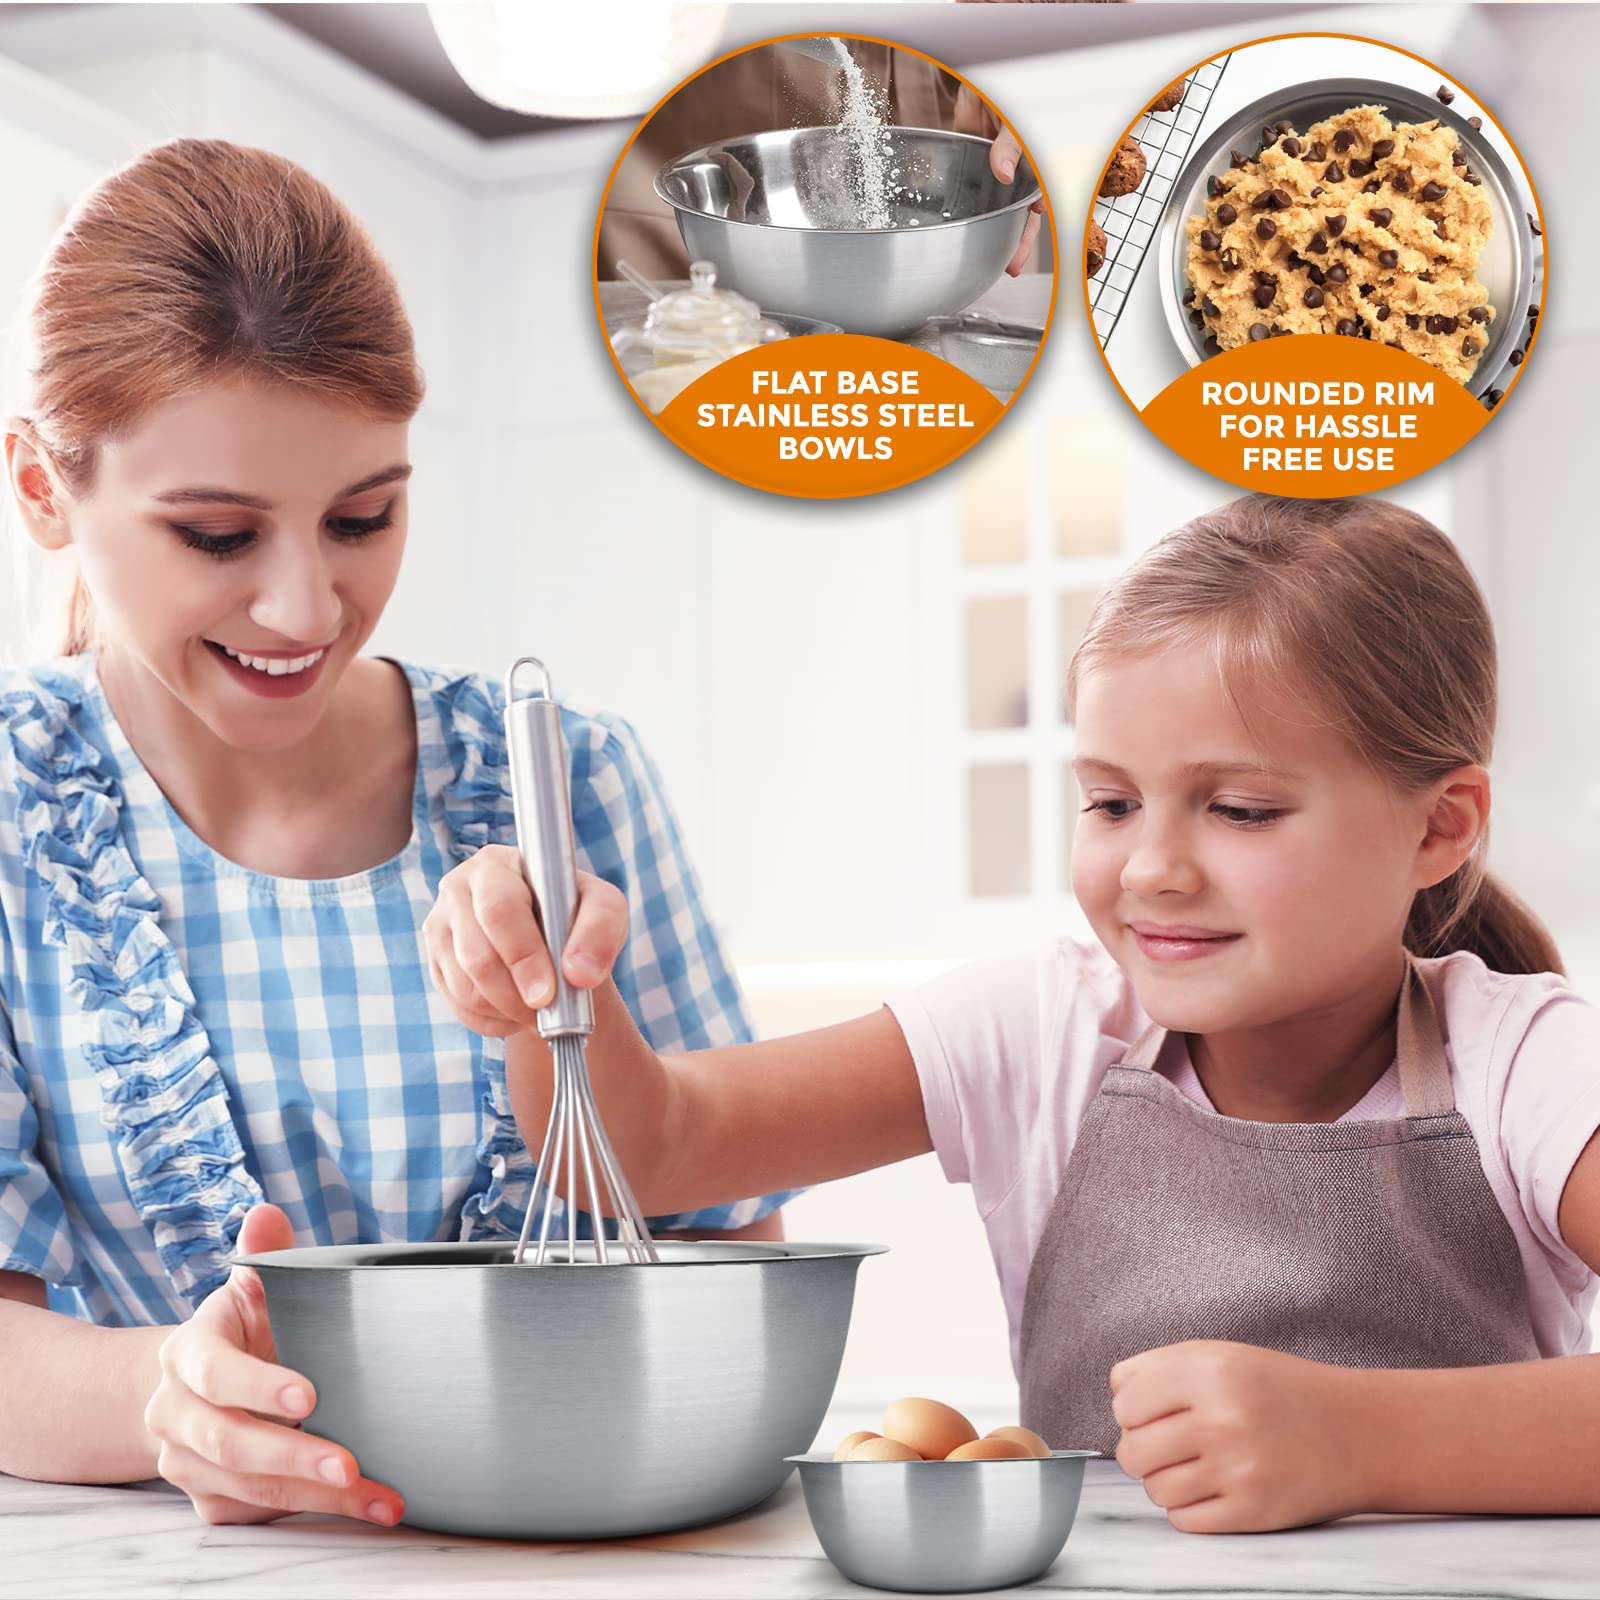 mixing bowl Set of 6 - stainless steel - Polished Mirror kitchen bowls - Set Includes ¾, 2, 3.5, 5, 6, 8 Quart - Ideal For Cooking & Serving - Easy to clean - Great gift